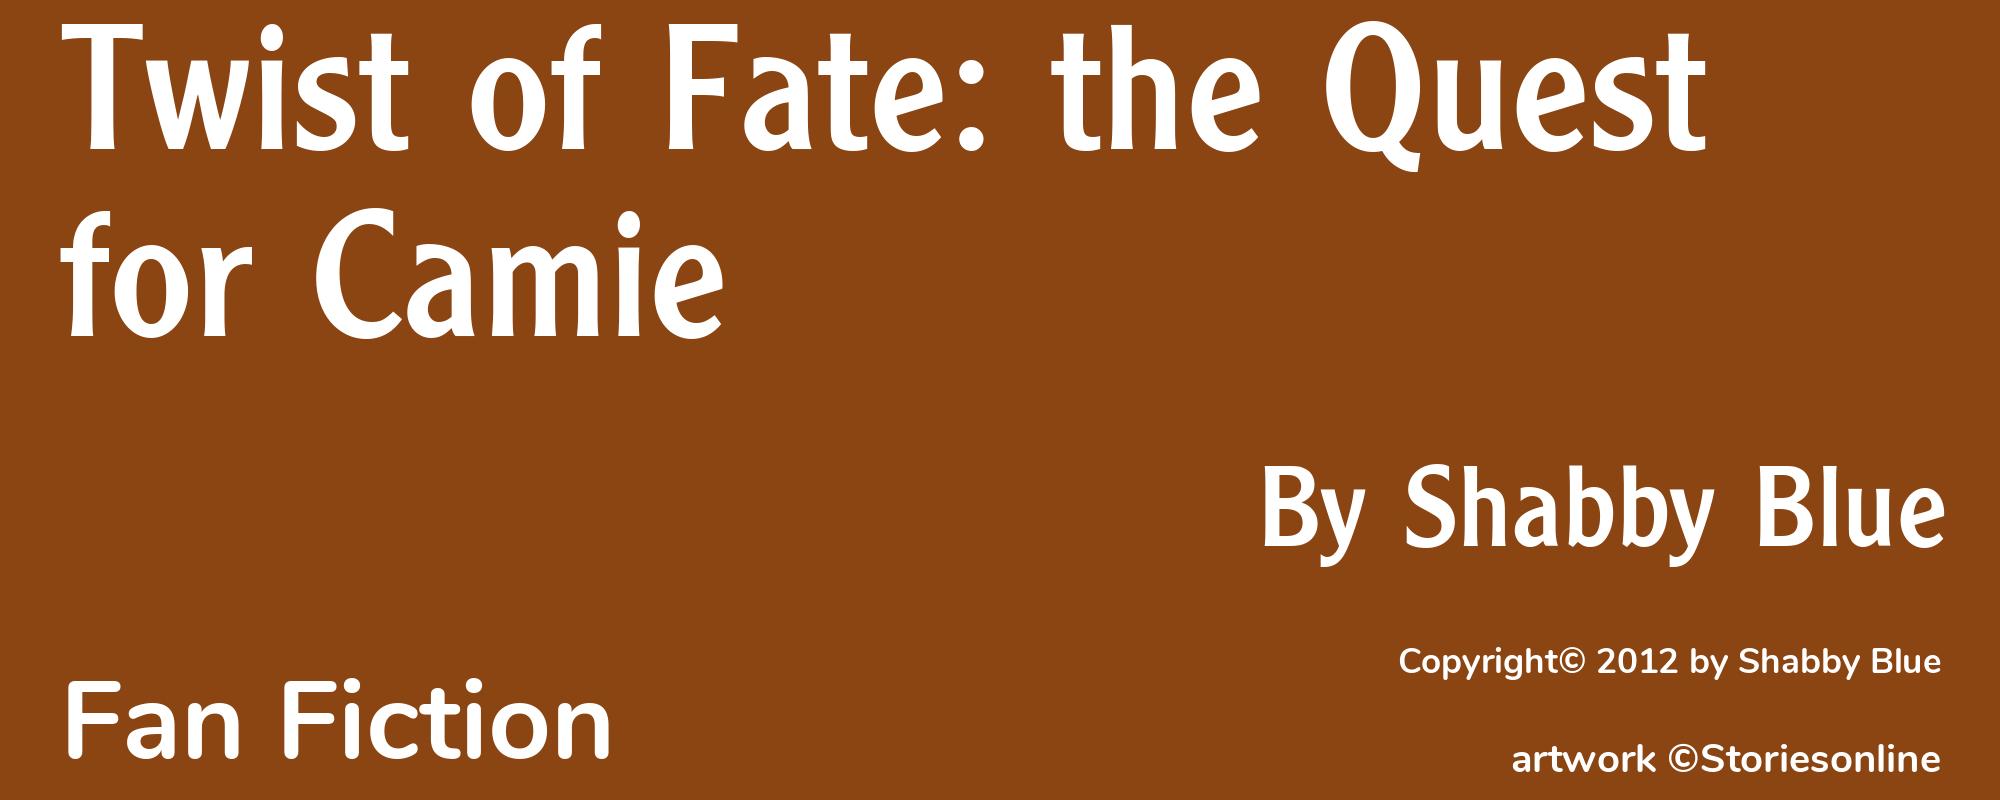 Twist of Fate: the Quest for Camie - Cover